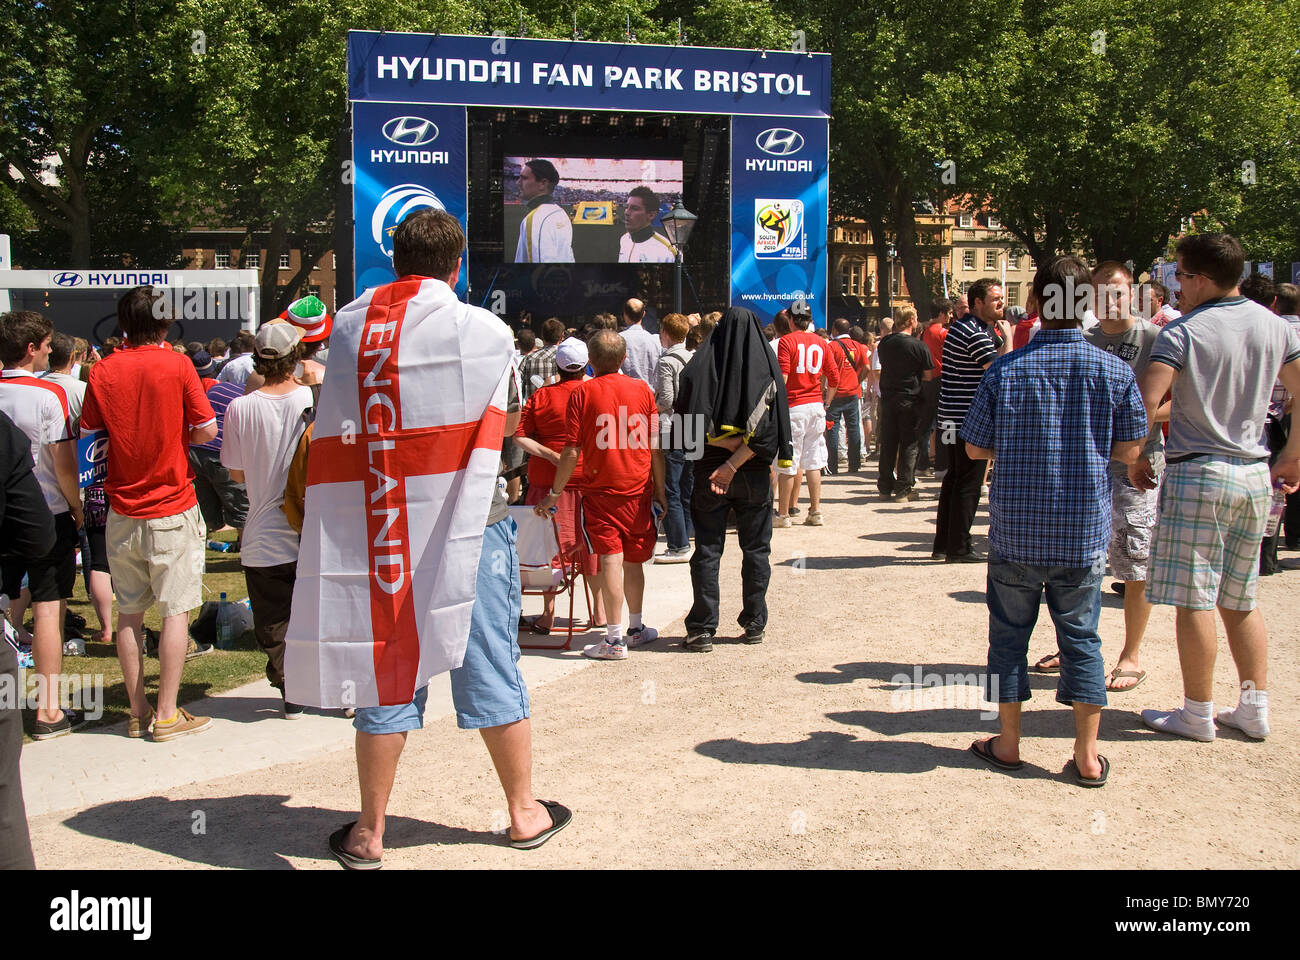 Fans watching english World Cup Game in Fan Park, Bristol, UK Stock Photo